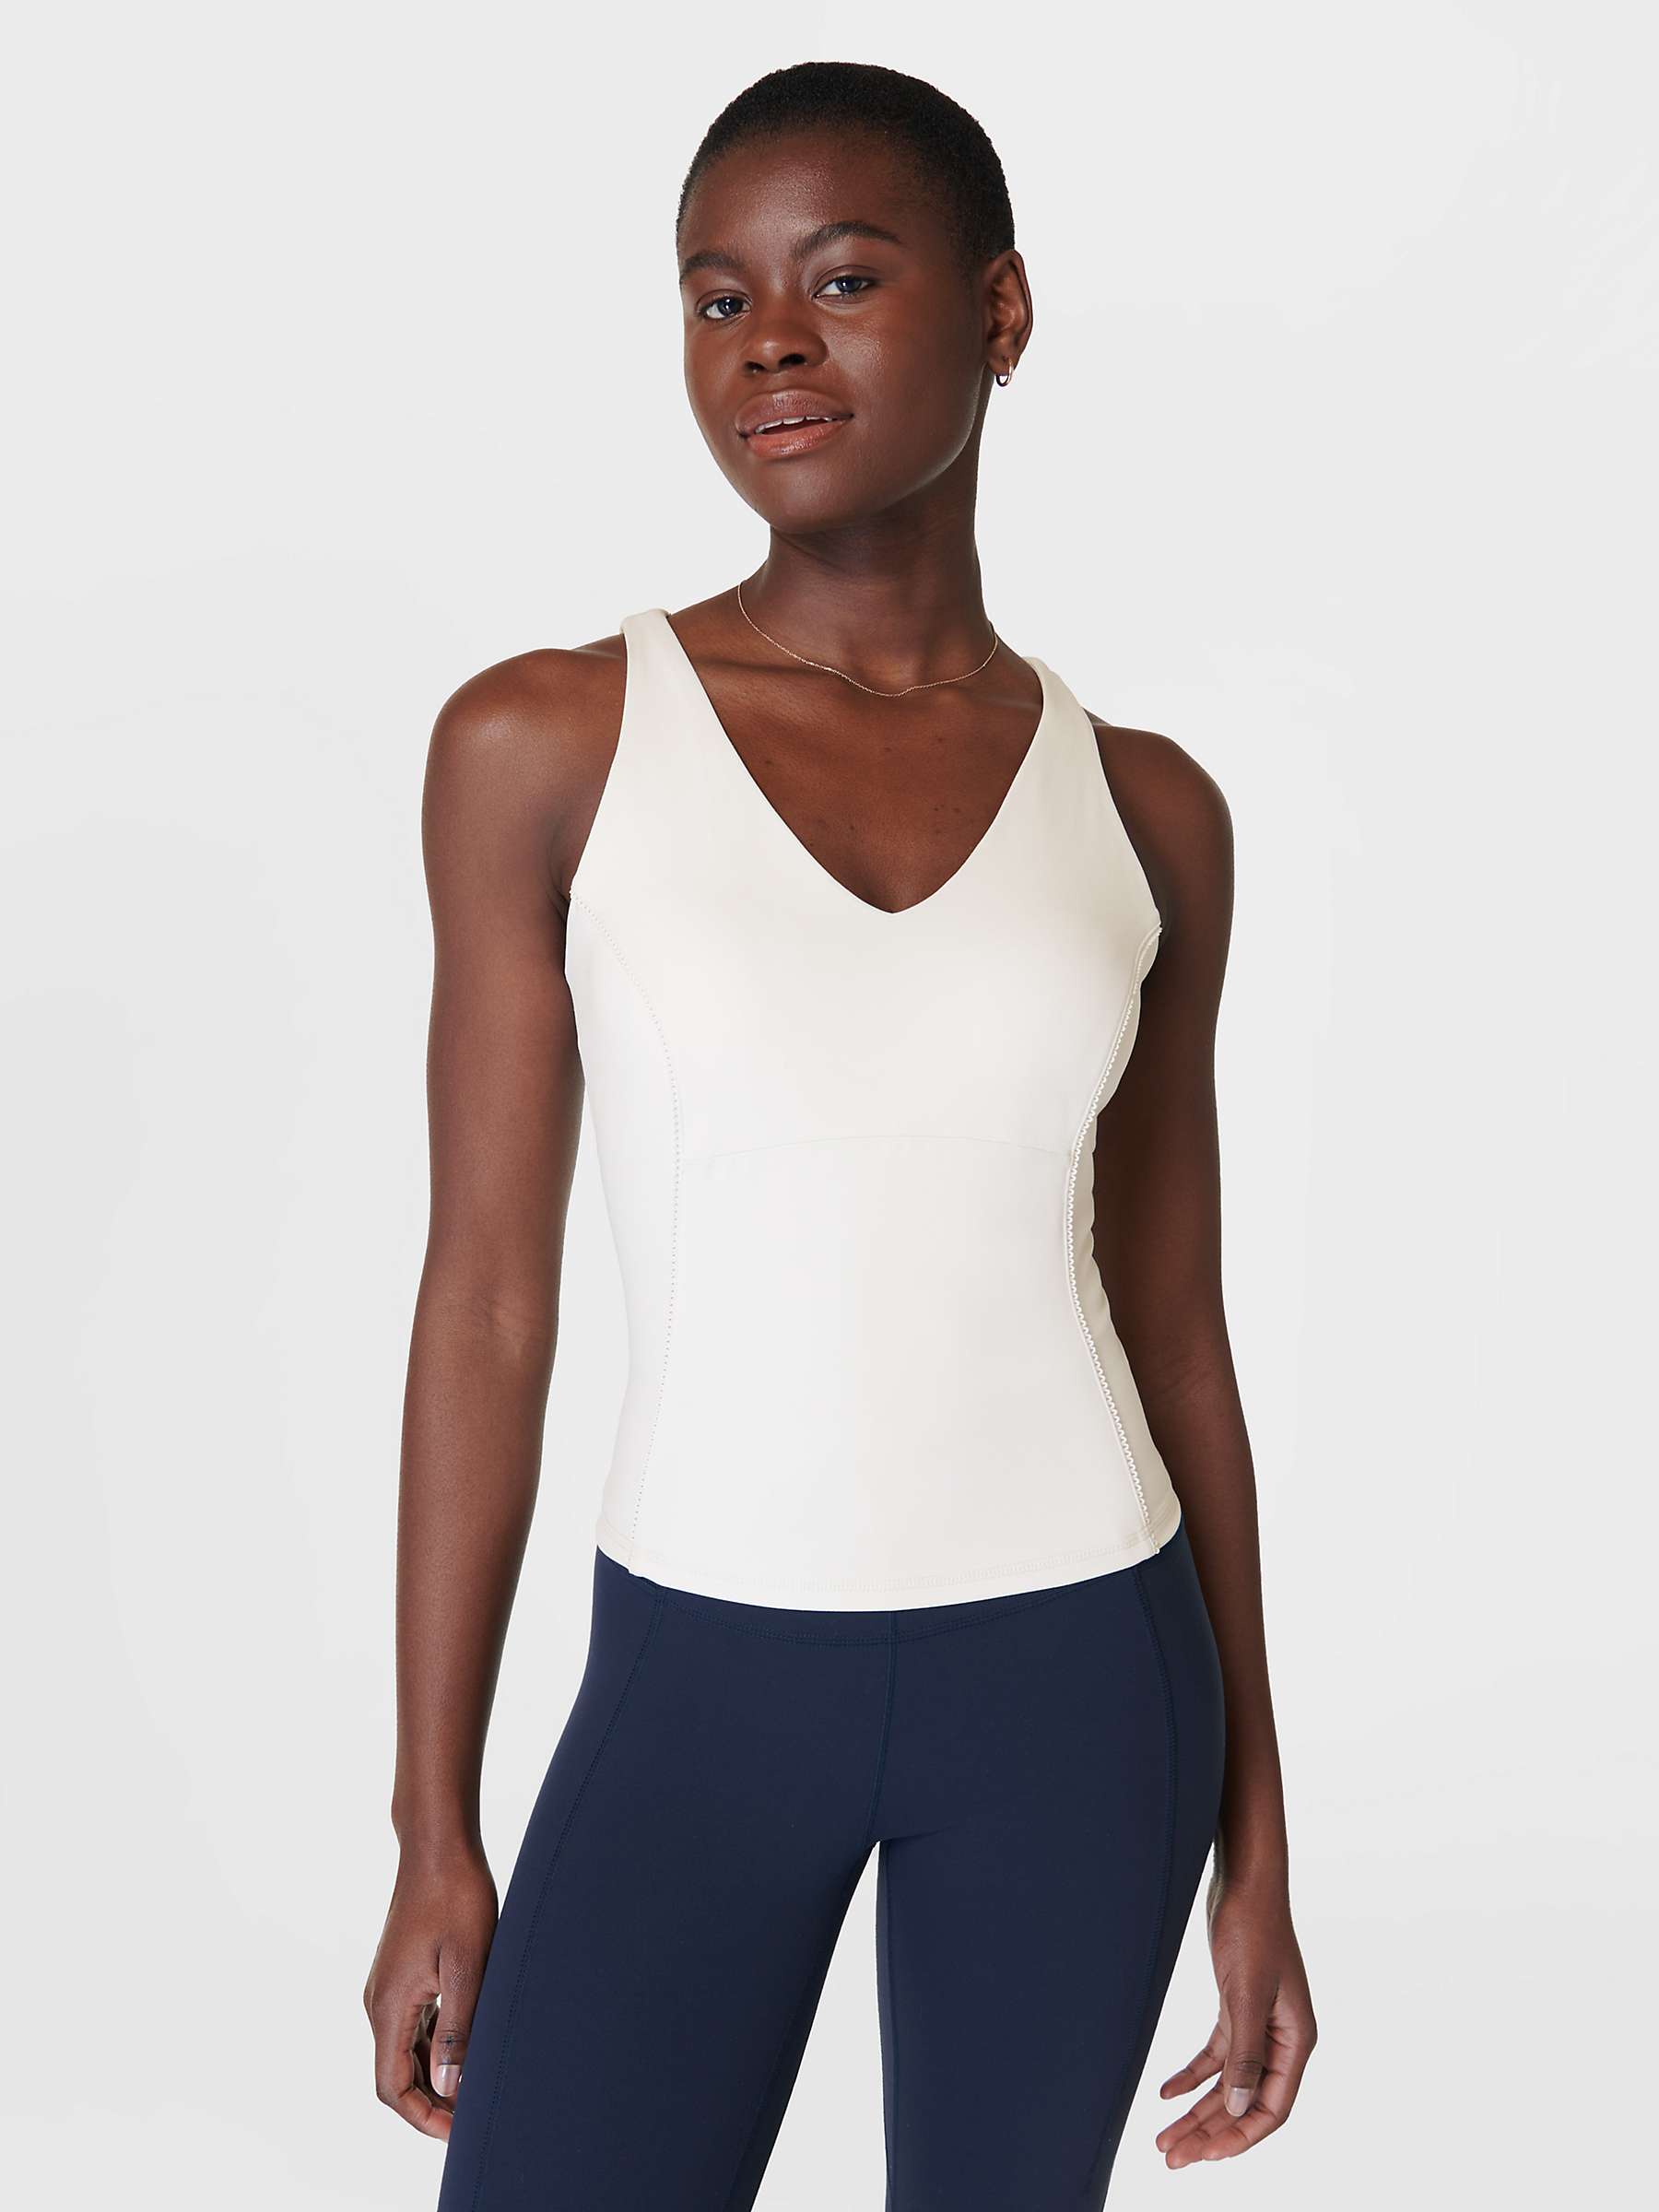 Buy Sweaty Betty Picot Lace Gym Top, Lily White Online at johnlewis.com